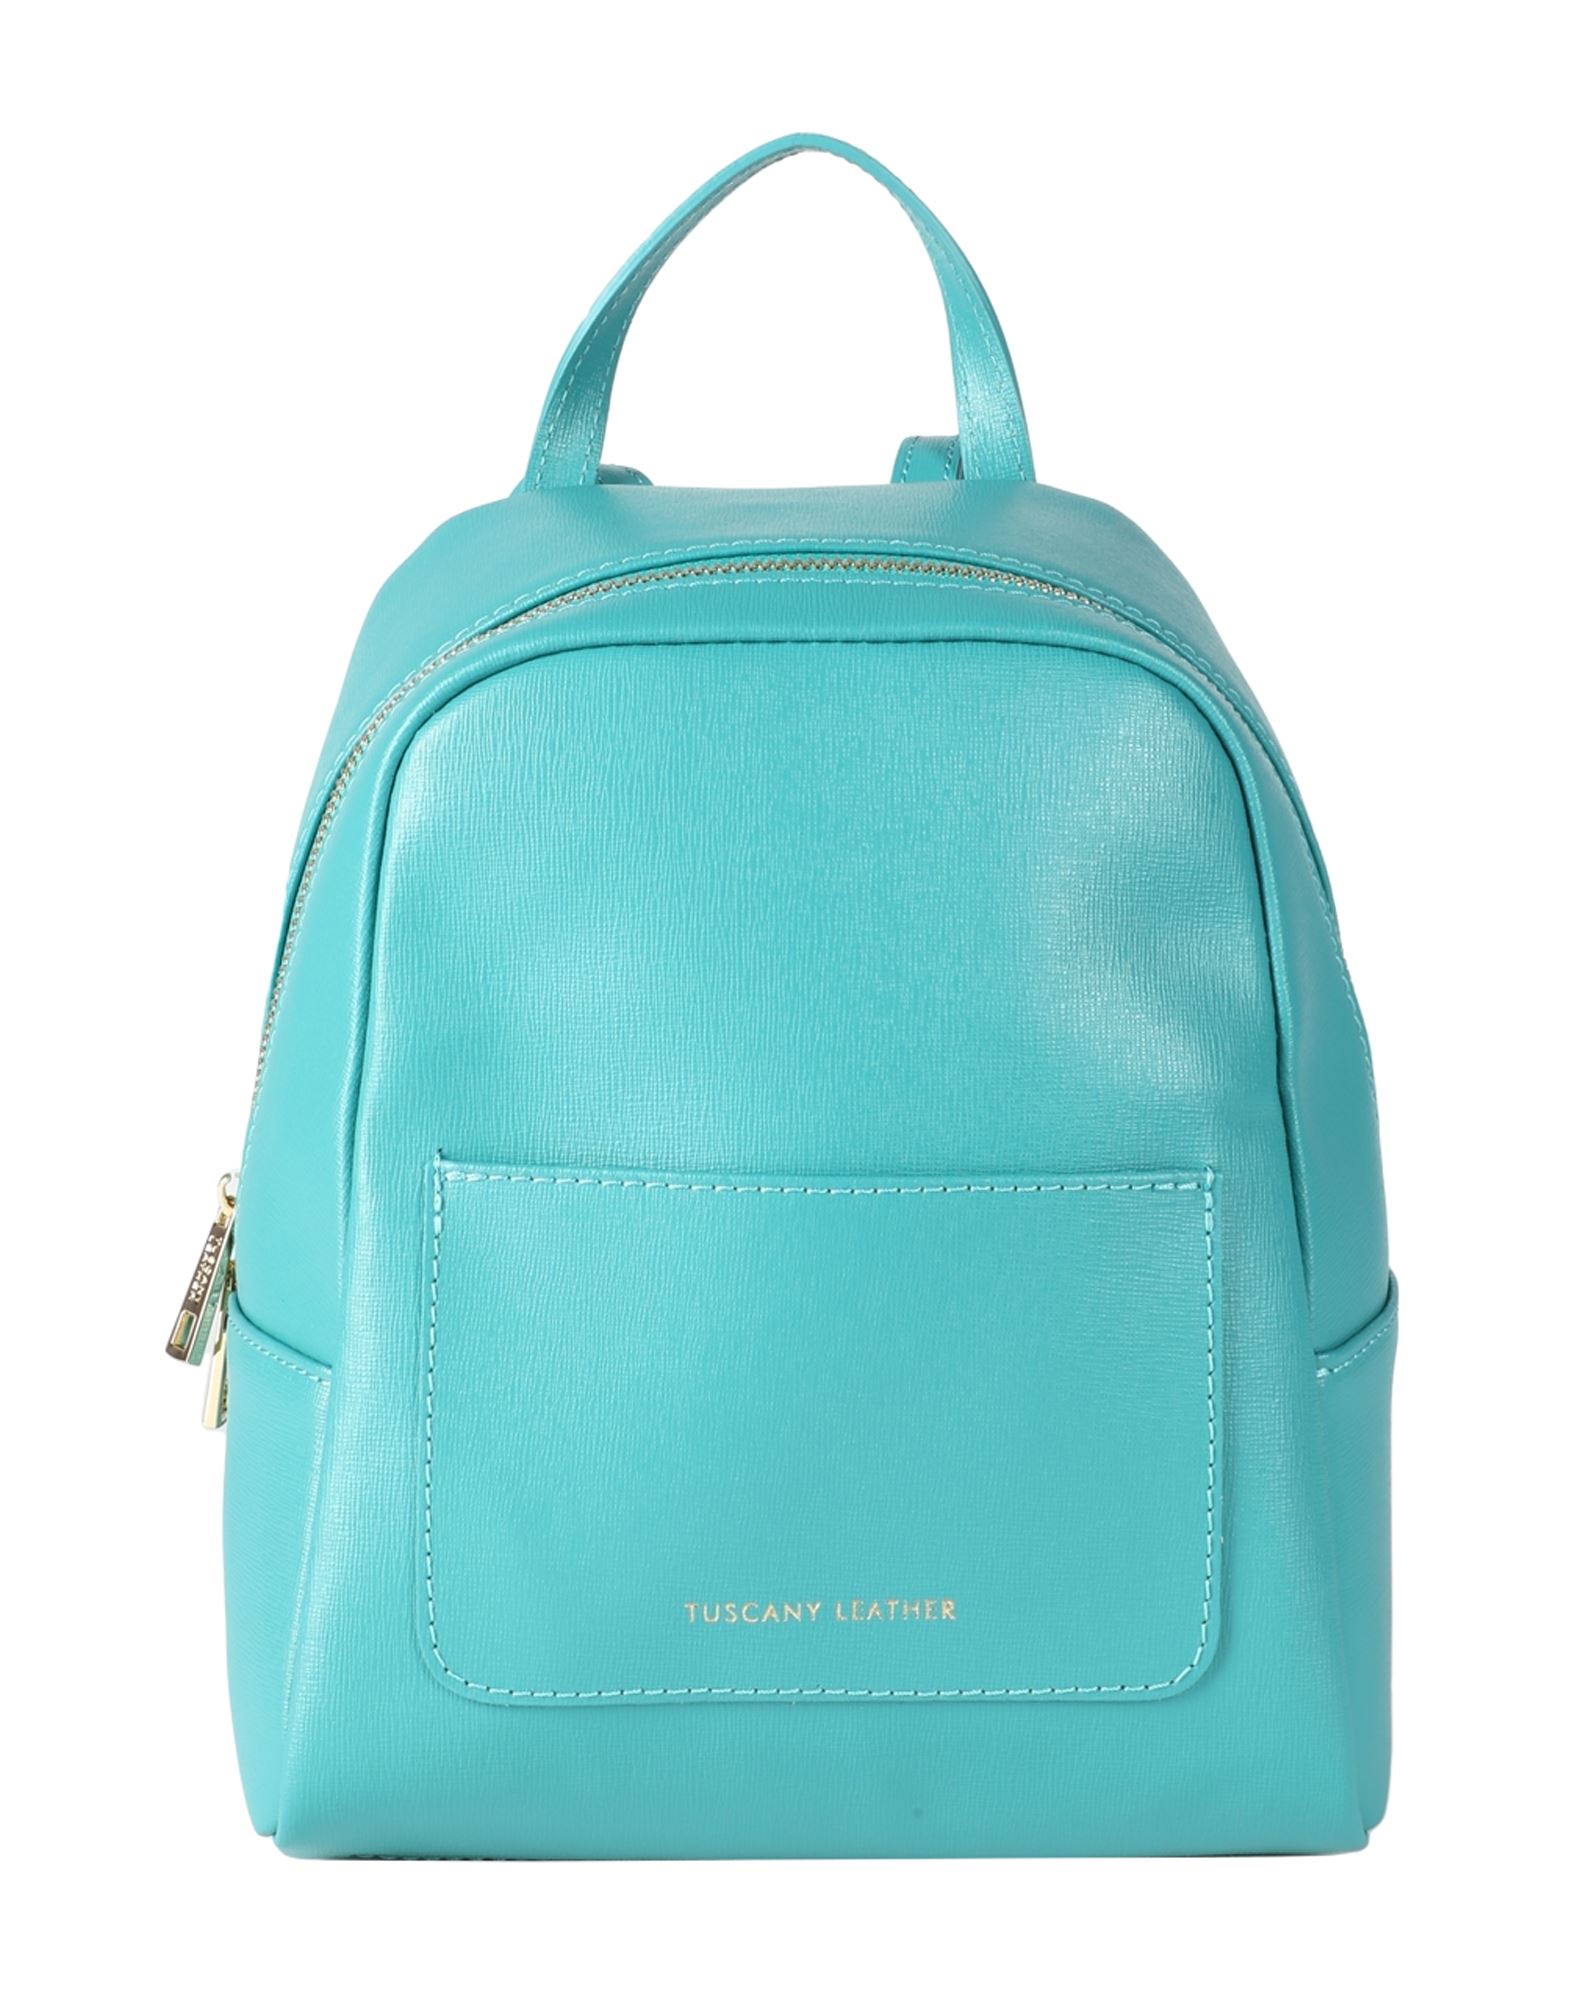 Tuscany Leather Backpacks In Turquoise